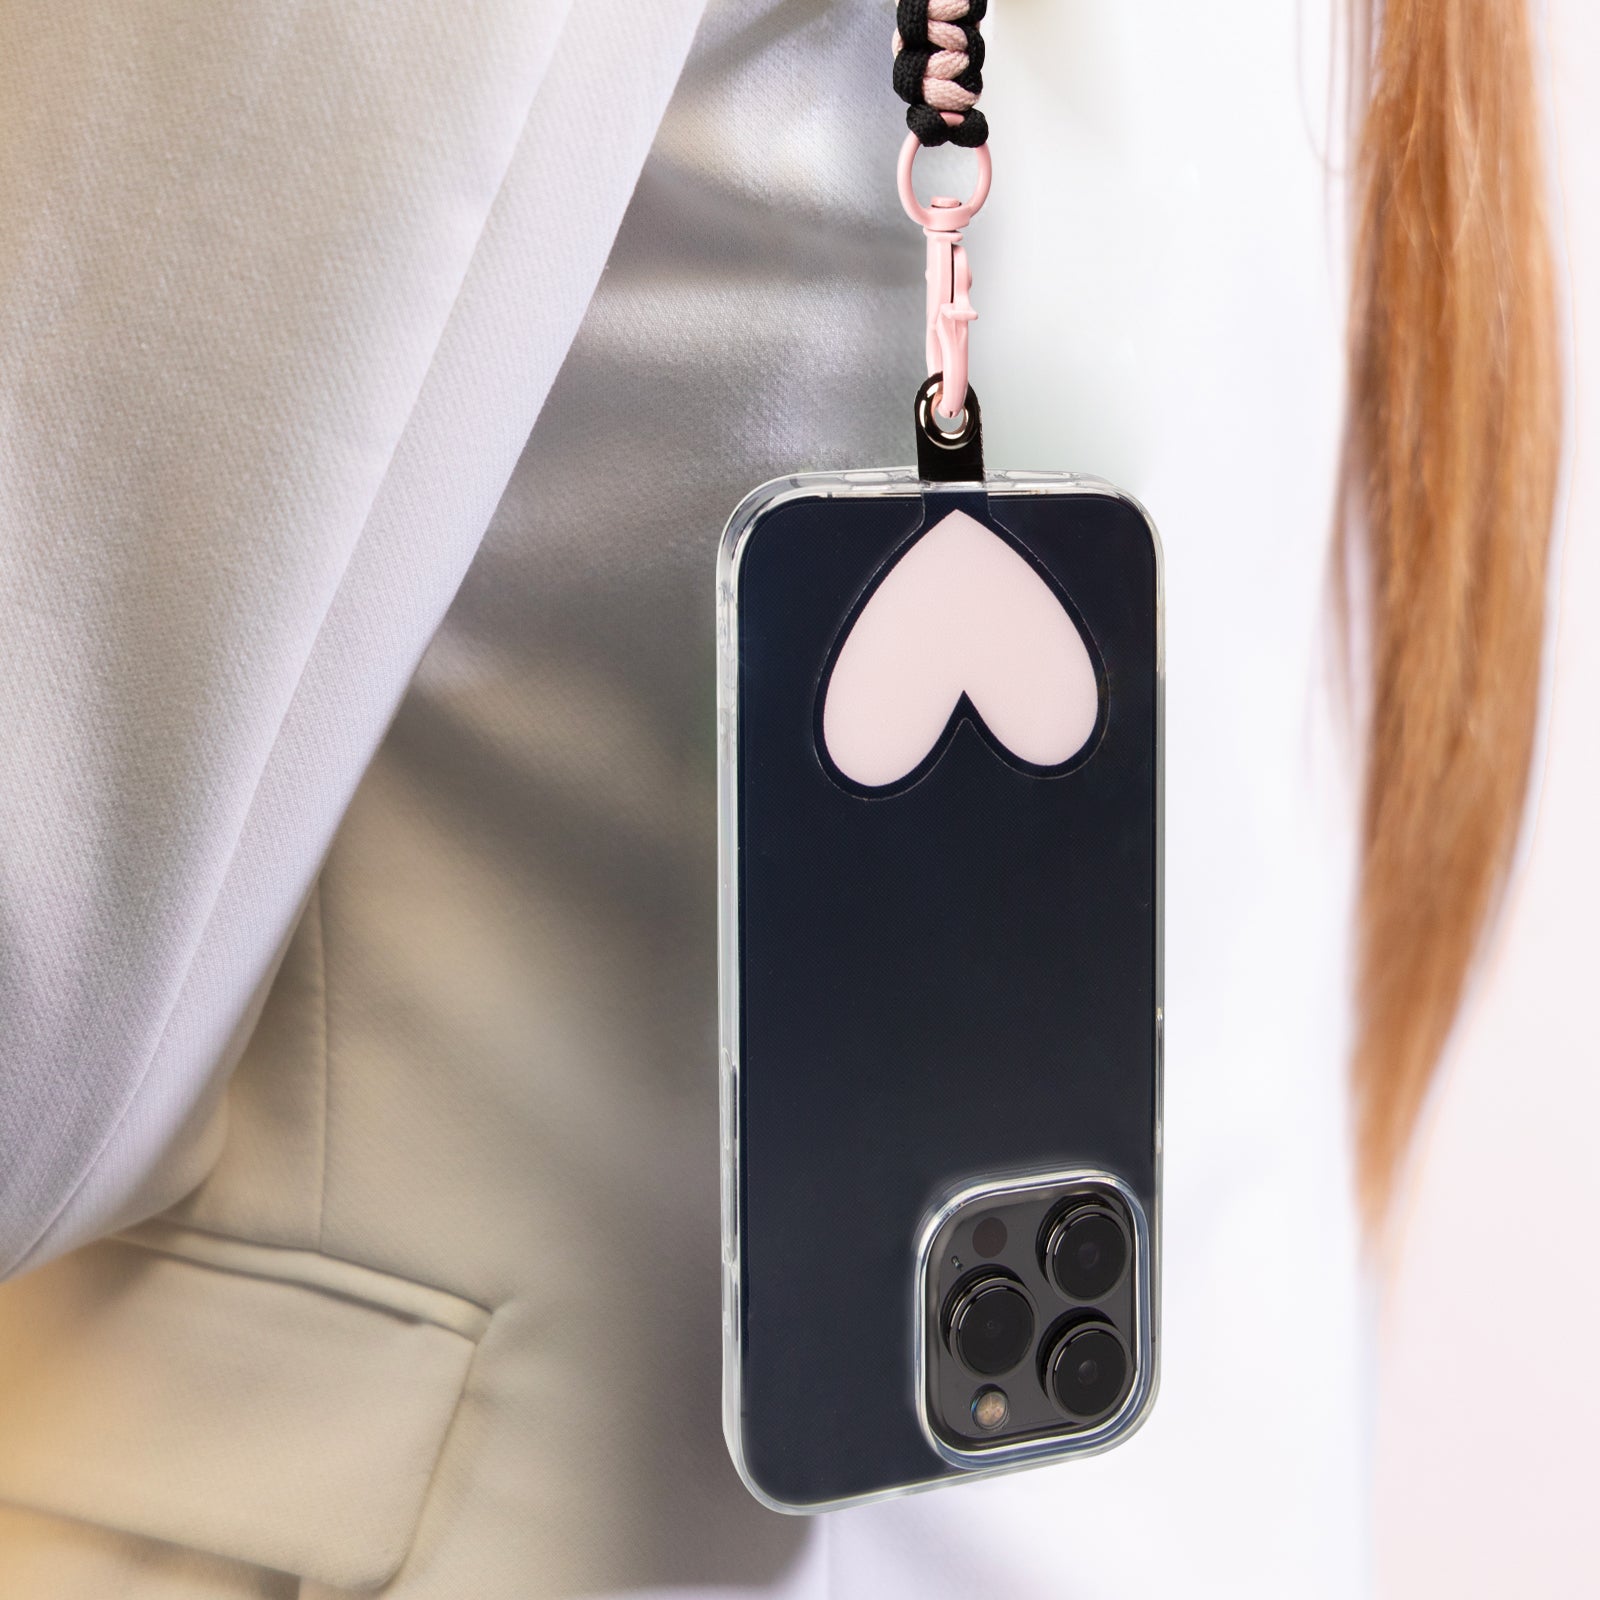 Heart-shaped universal neck strap for smartphones